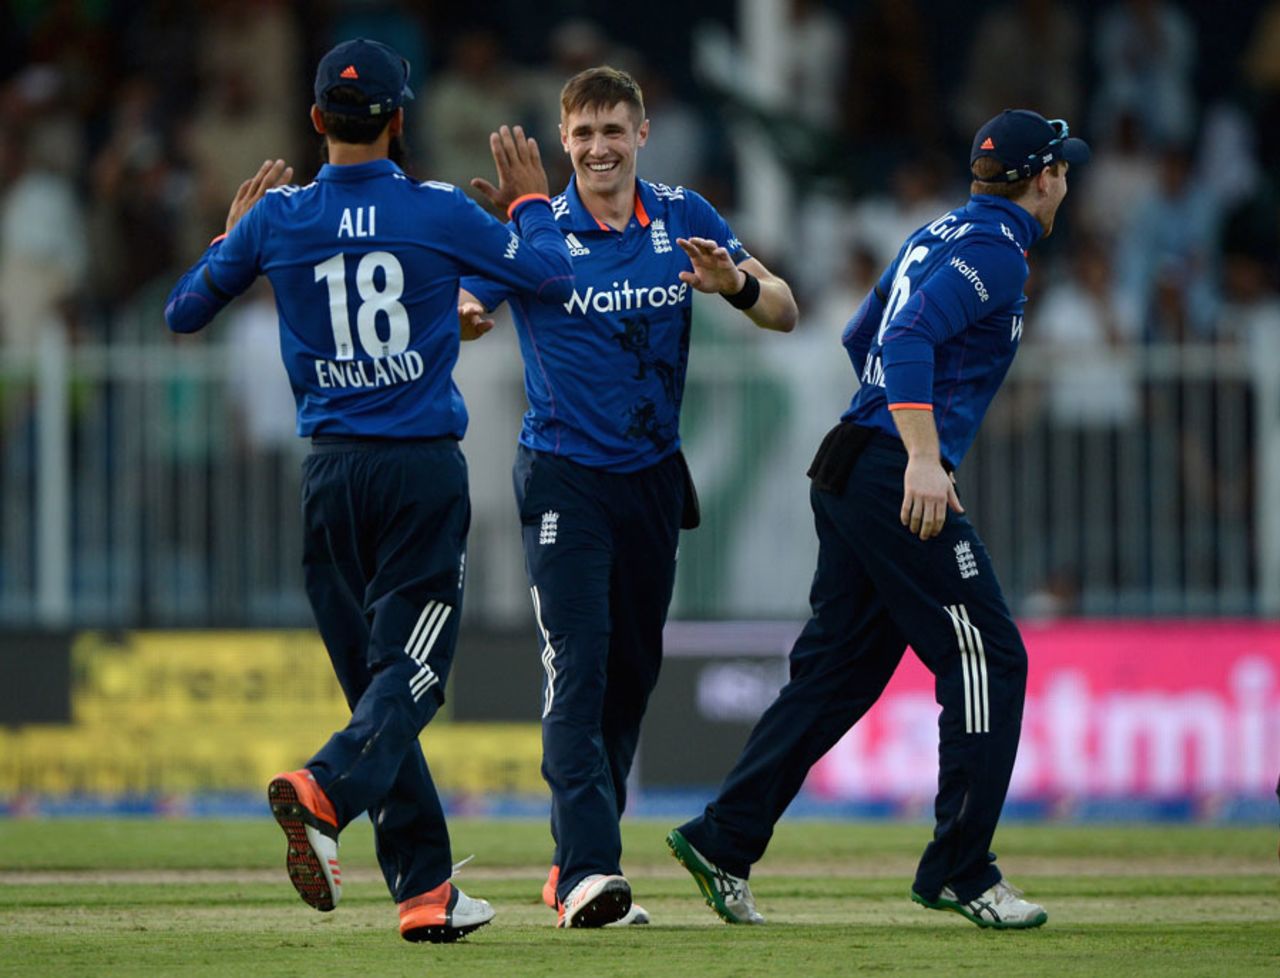 Chris Woakes got a second wicket with the short ball, Pakistan v England, 3rd ODI, Sharjah, November 17, 2015